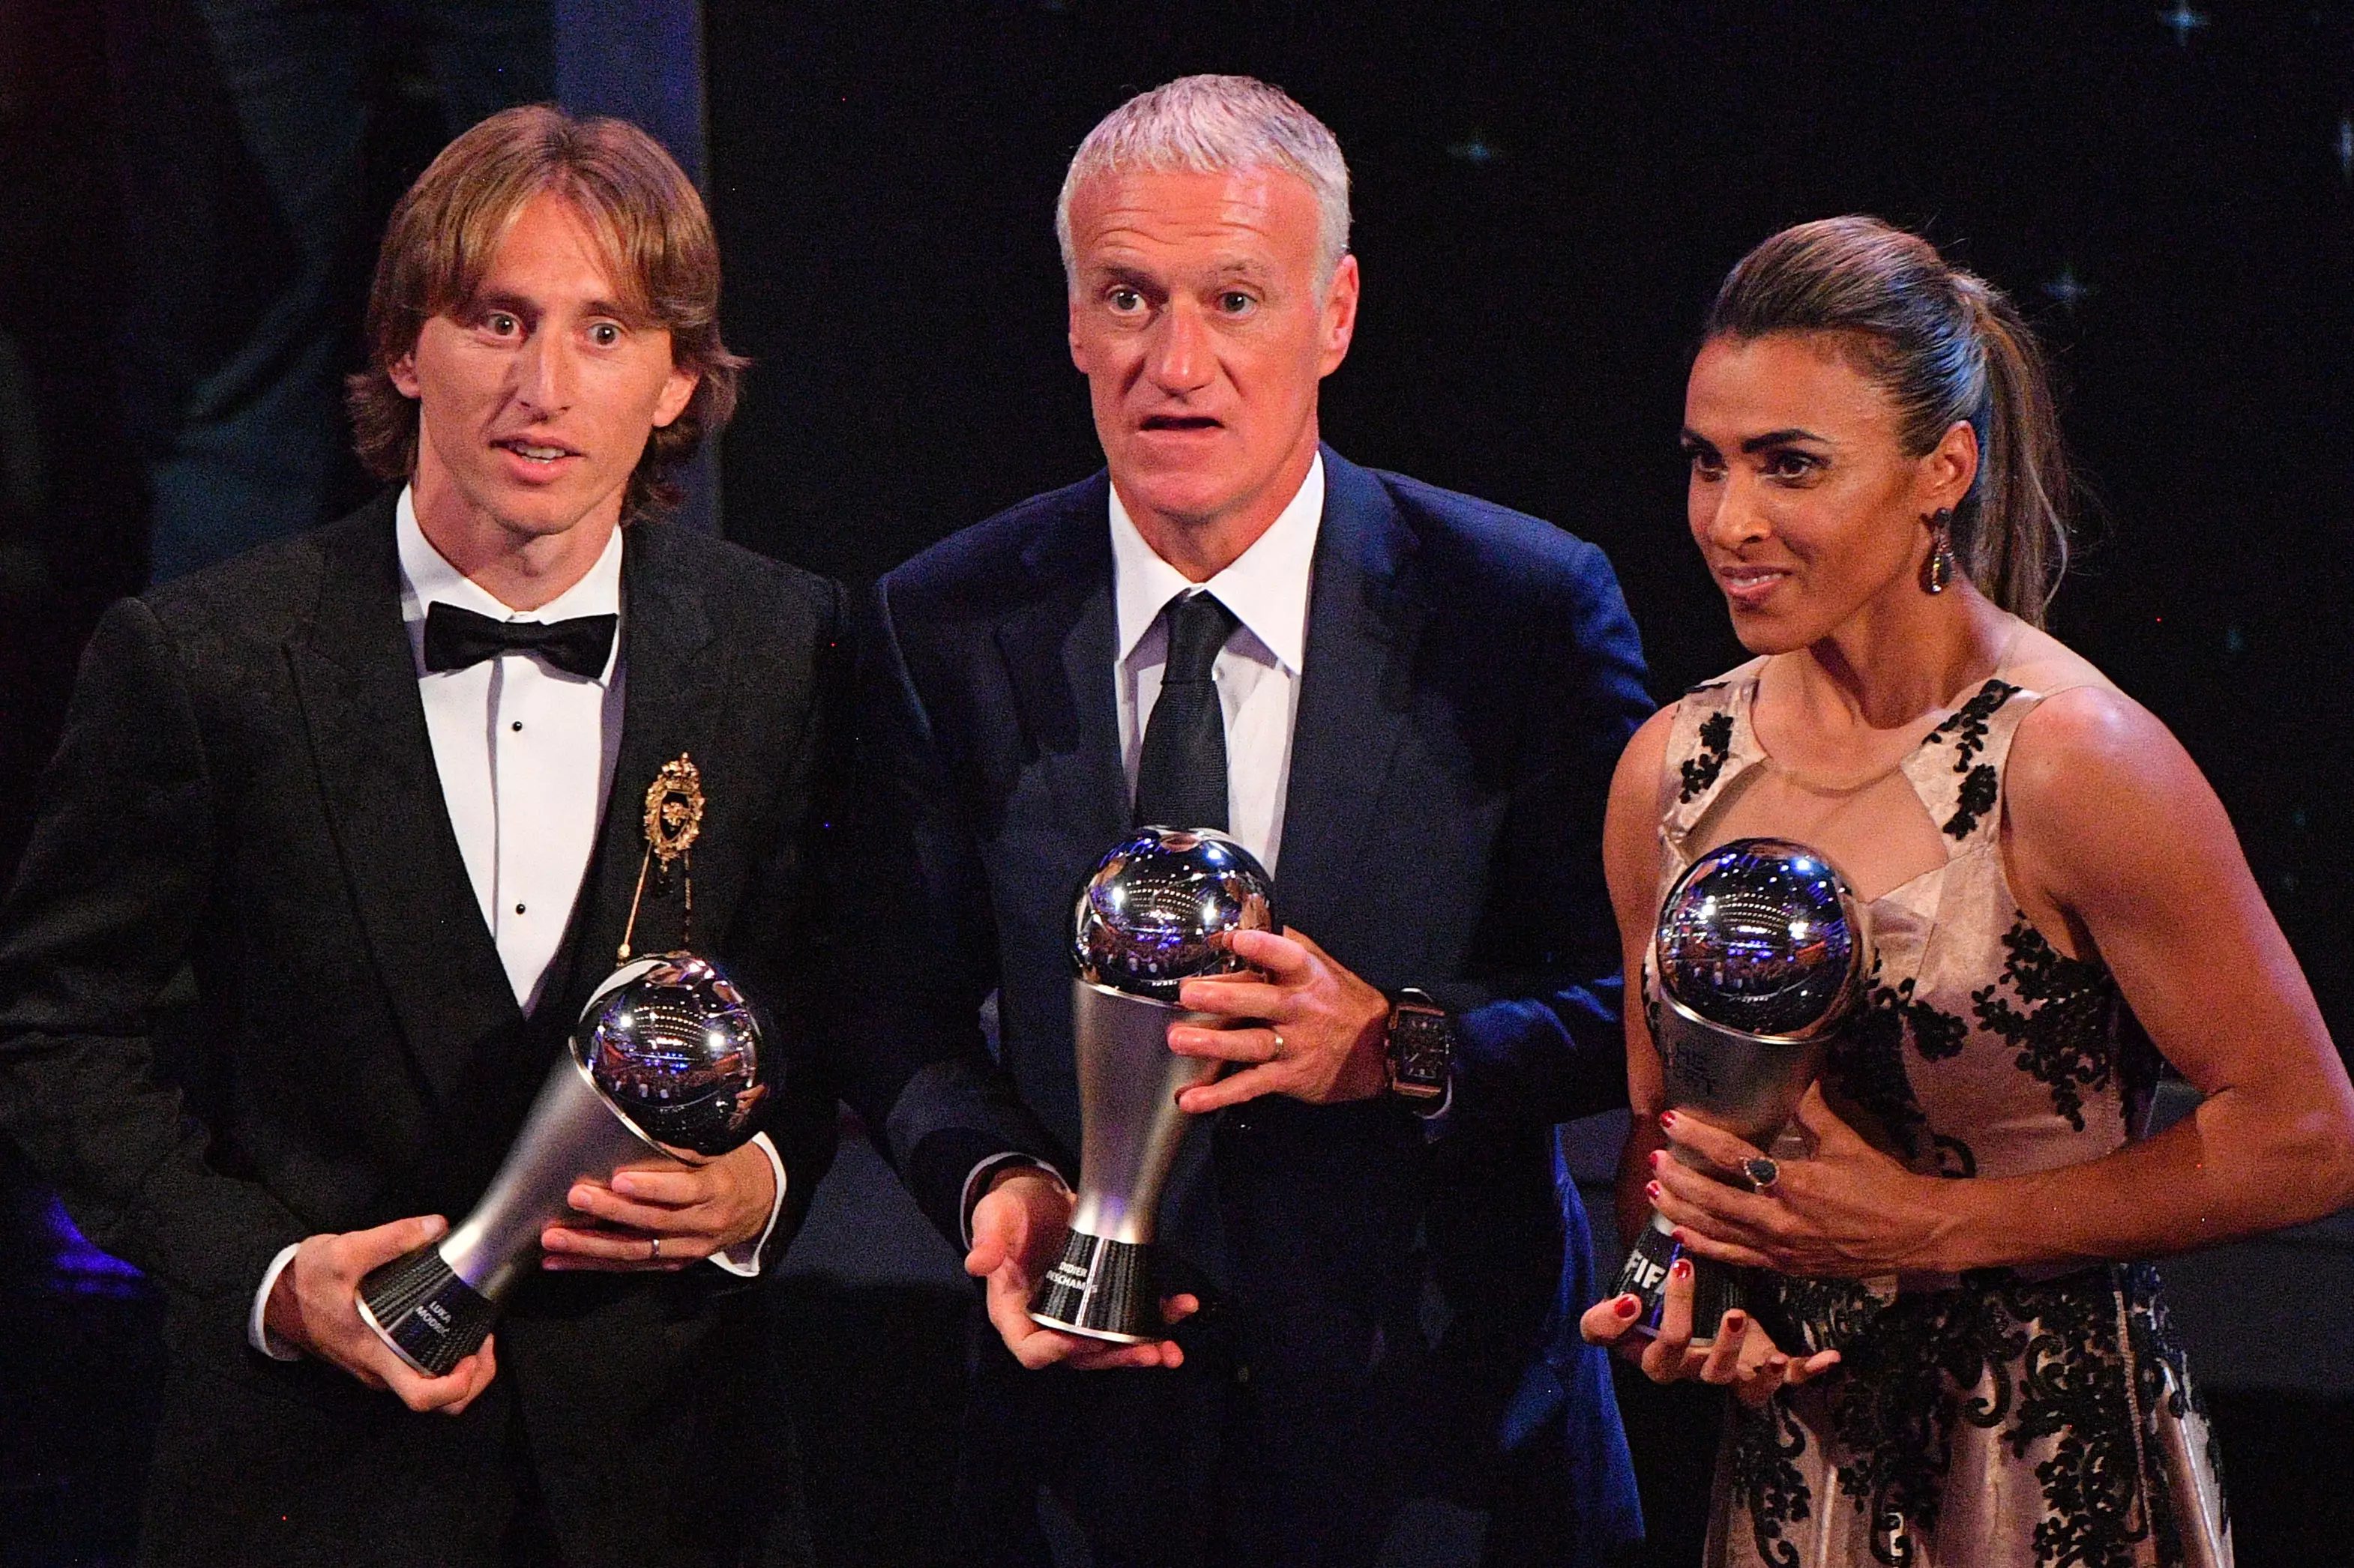 Modric with Didier Deschamps and Marta, who won Best Manager and Best Female Player Awards respectively. Image: PA Images